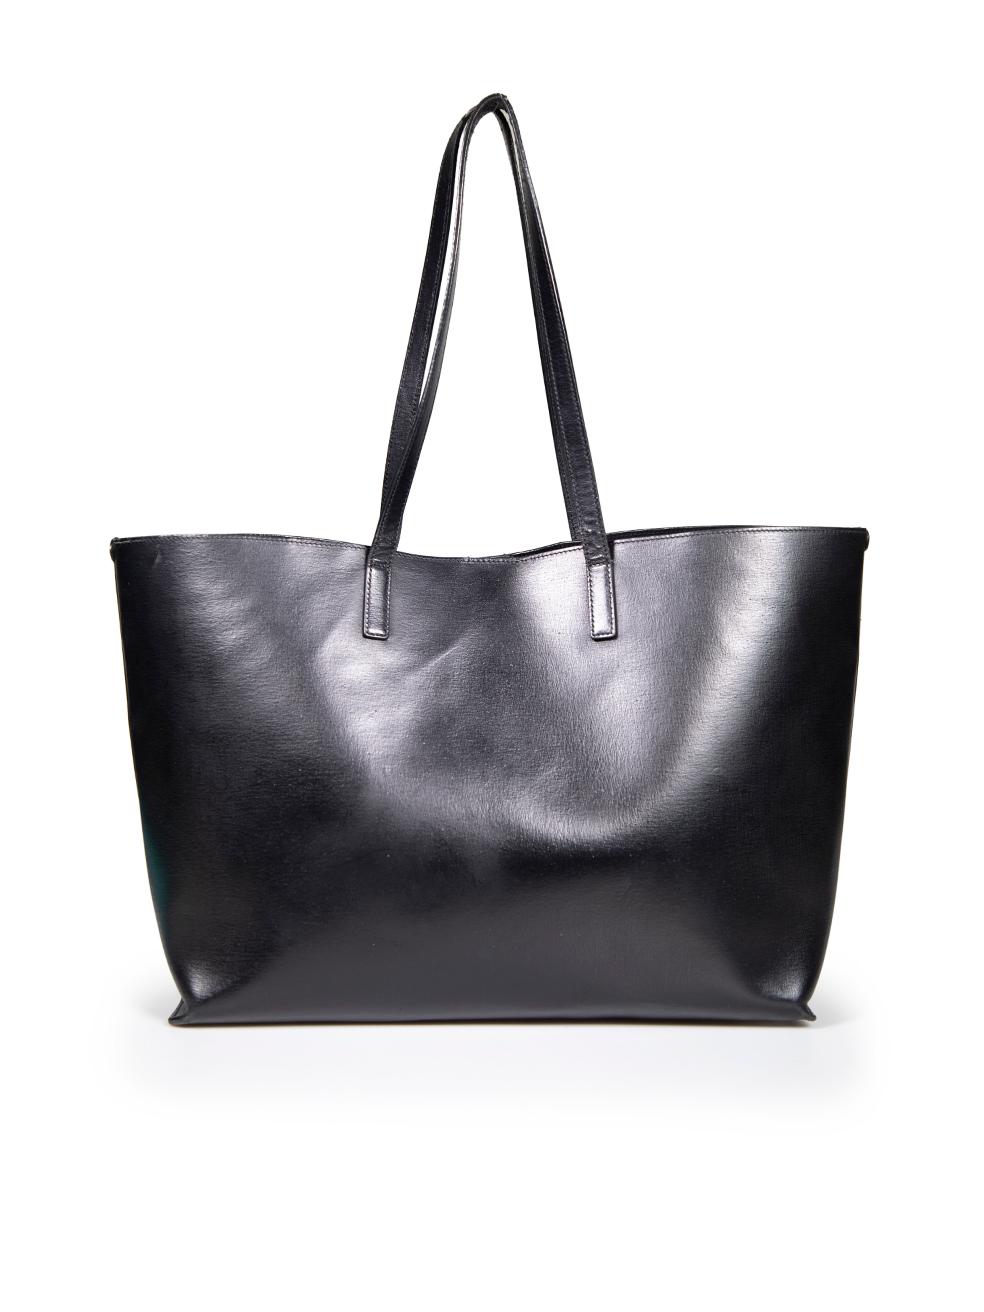 Saint Laurent Black Leather Perforated East West Shopper Tote In Good Condition For Sale In London, GB